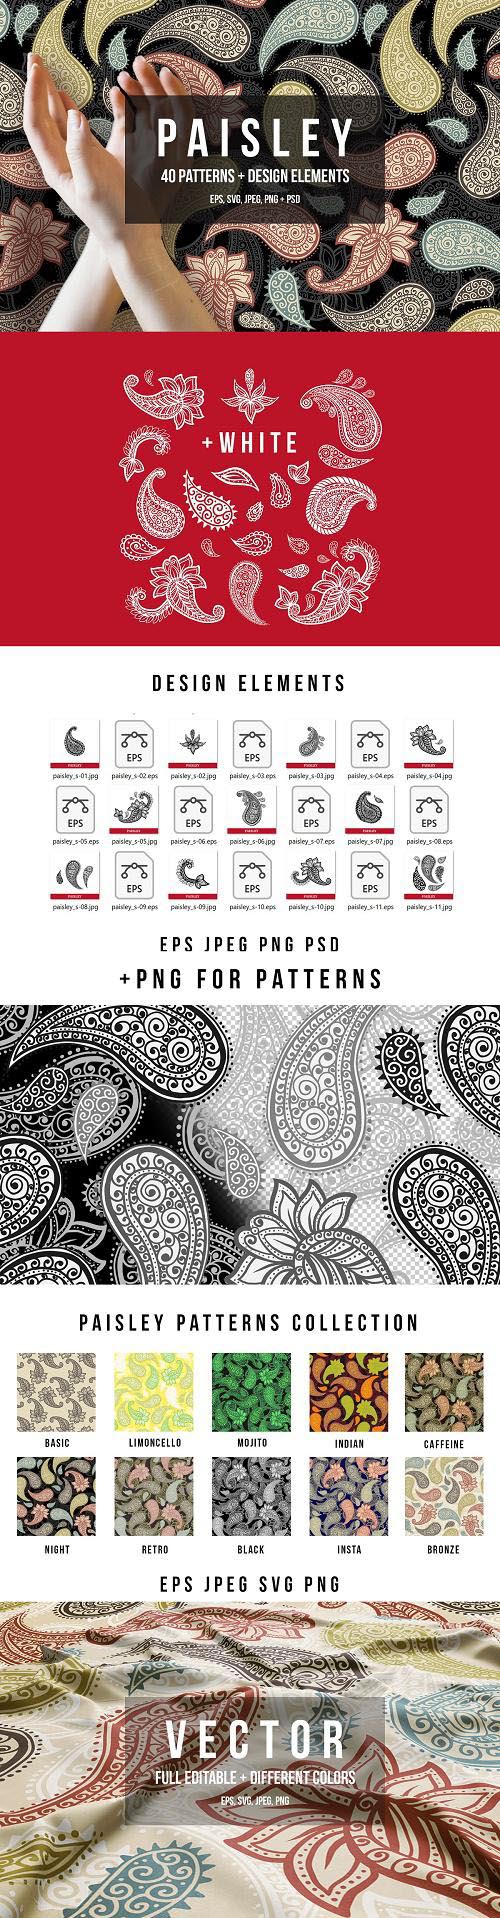 Paisley Patterns Collection - 3702274